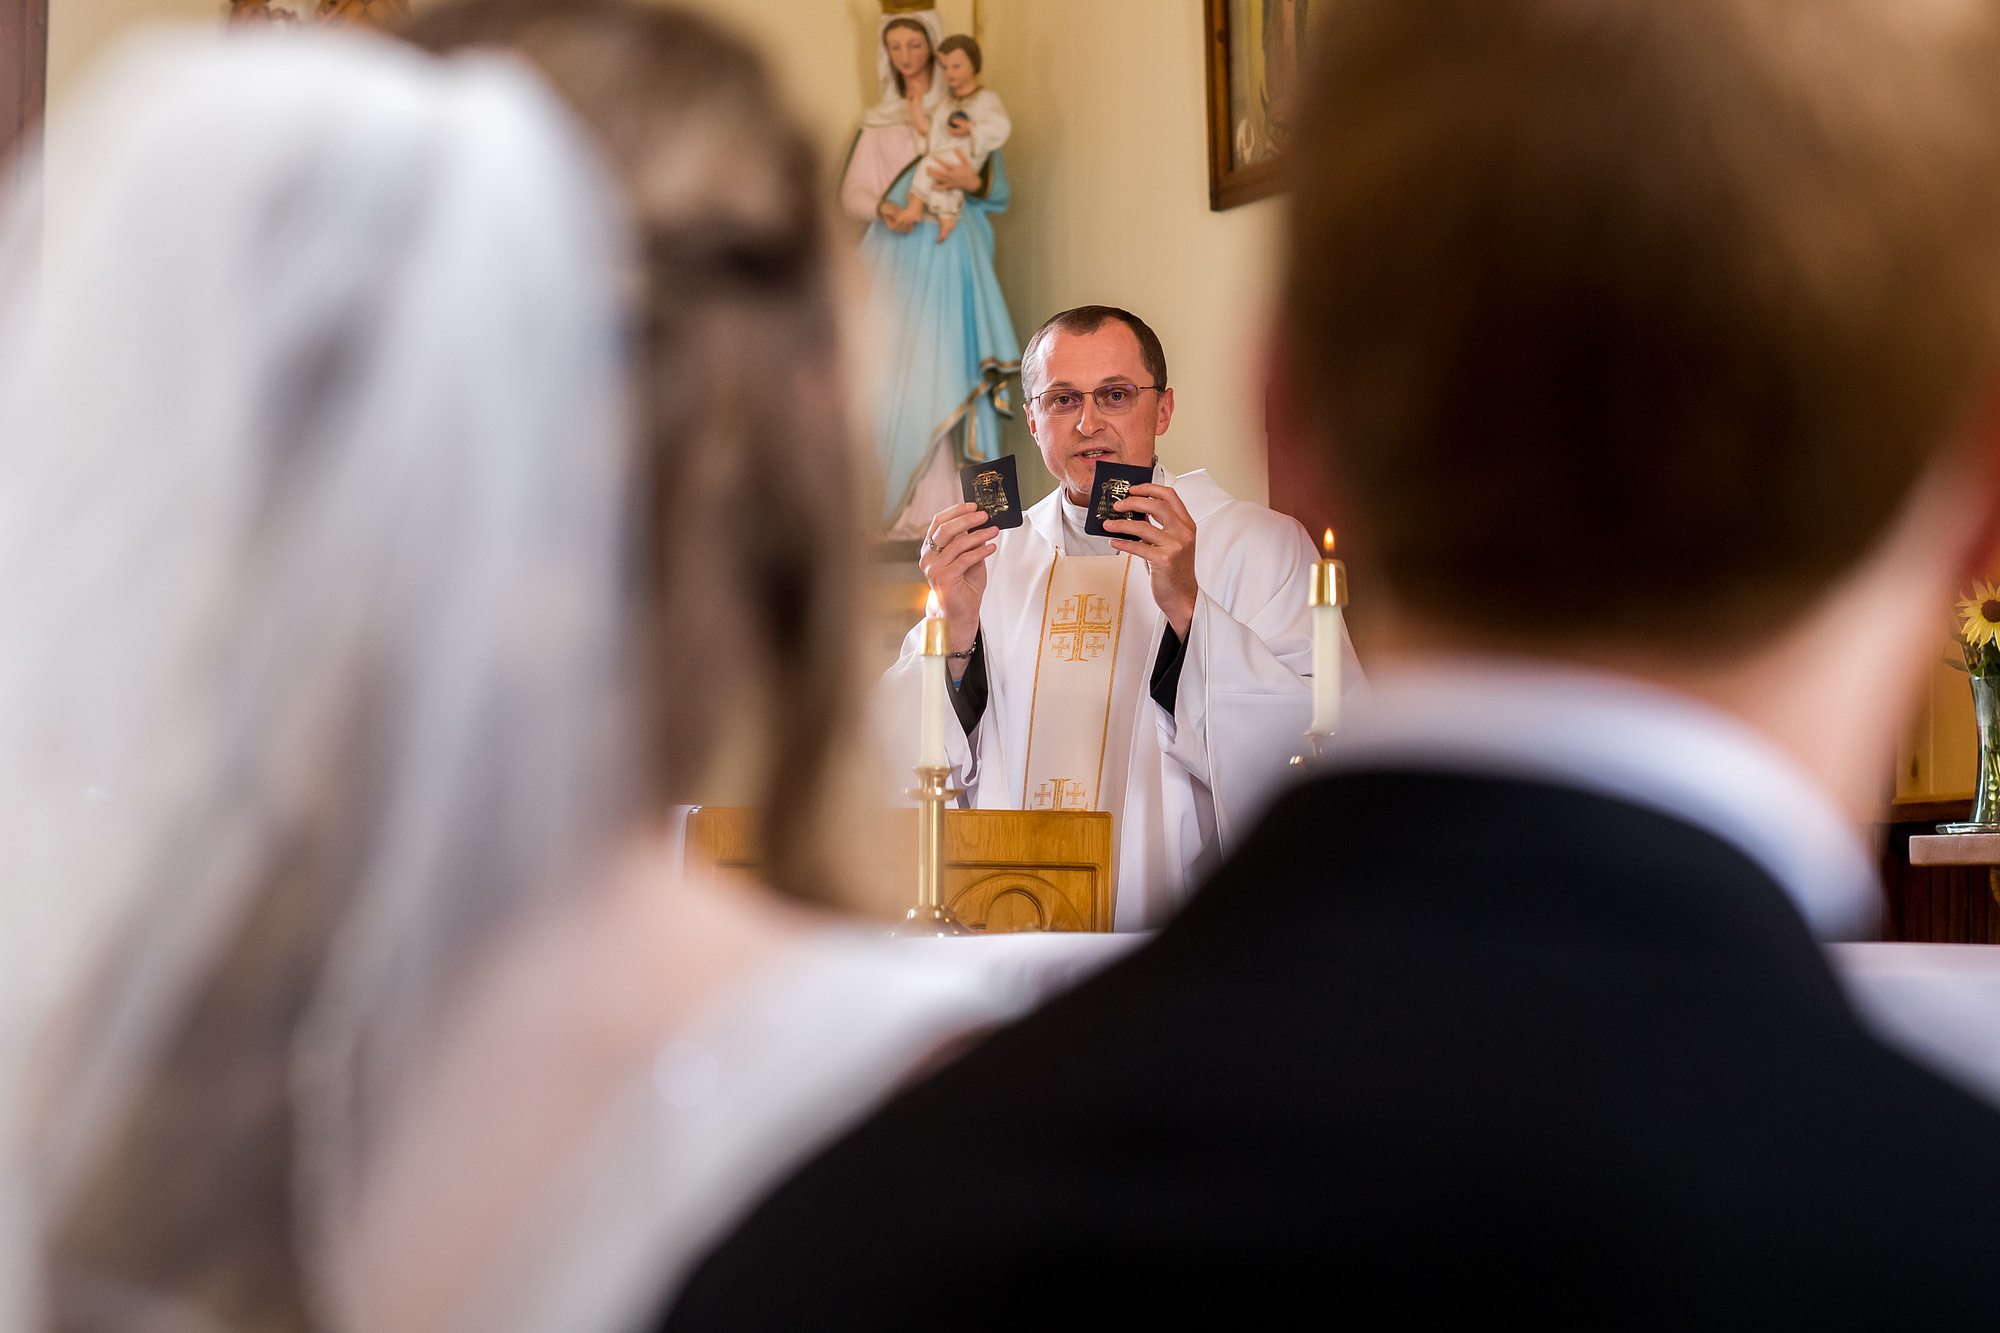 The priest holds two rosaries during a Telluride, Colorado, wedding at St. Patrick's Catholic Church.